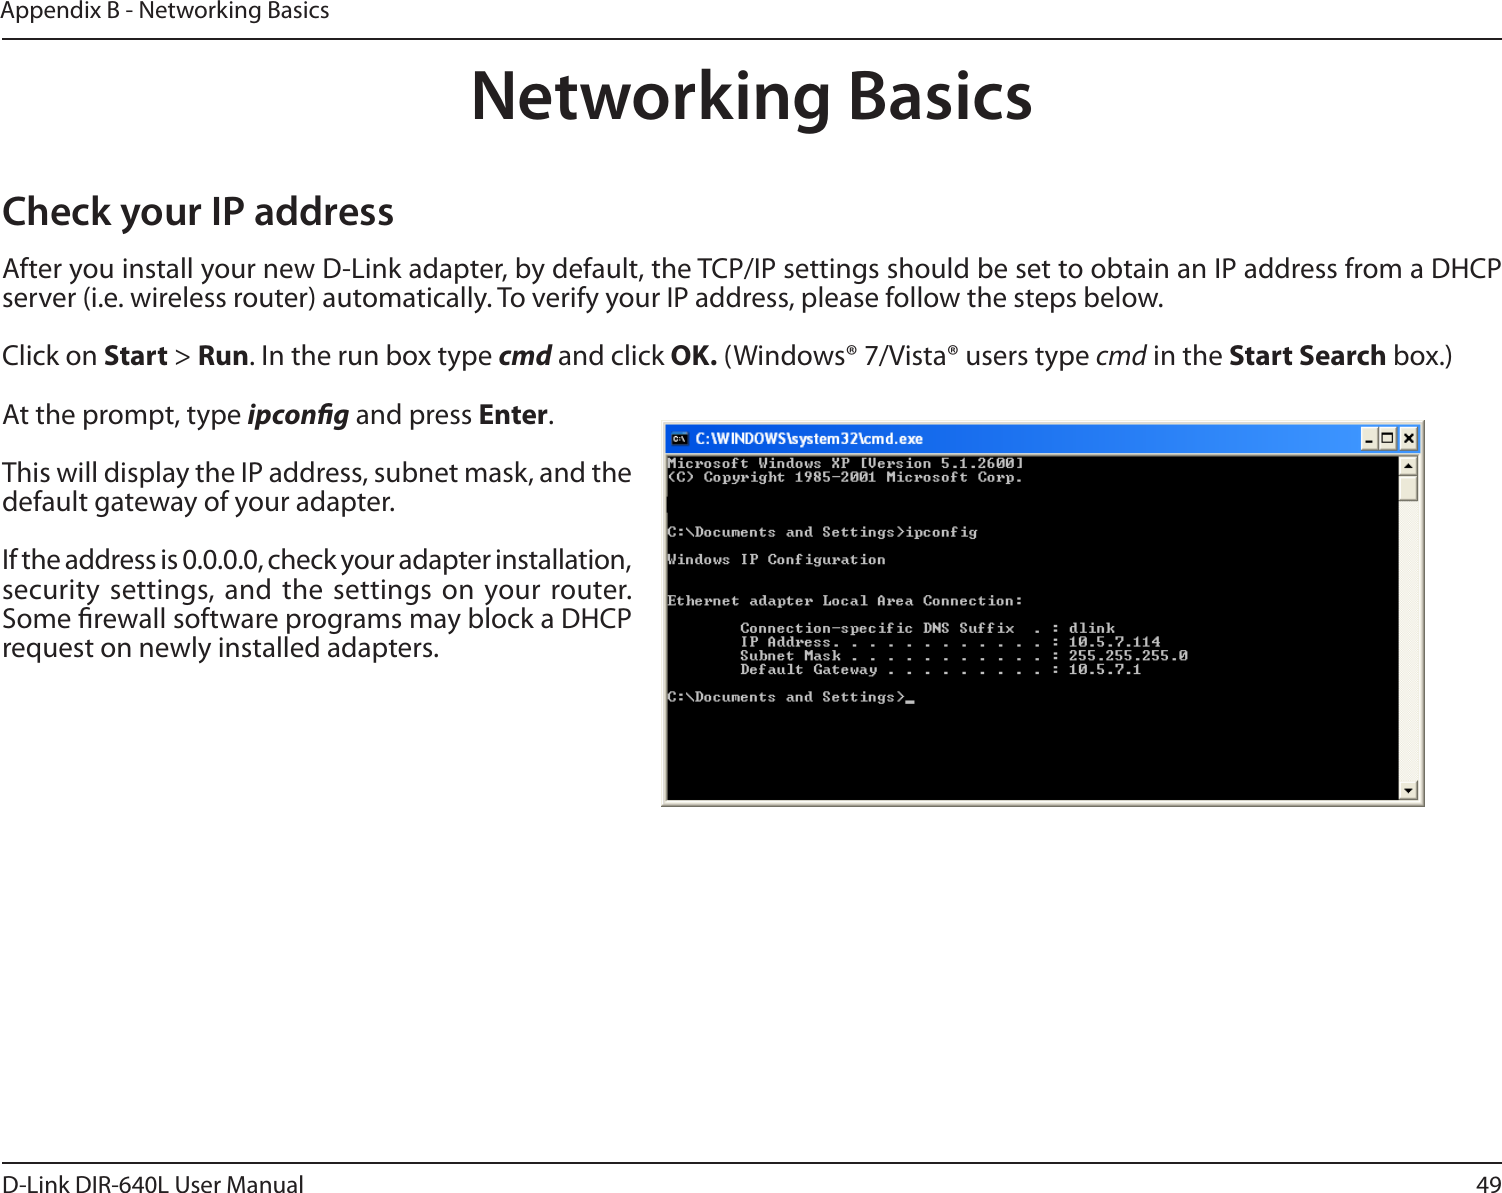 49D-Link DIR-640L User ManualAppendix B - Networking BasicsNetworking BasicsCheck your IP addressAfter you install your new D-Link adapter, by default, the TCP/IP settings should be set to obtain an IP address from a DHCP server (i.e. wireless router) automatically. To verify your IP address, please follow the steps below.Click on Start &gt; Run. In the run box type cmd and click OK. (Windows® 7/Vista® users type cmd in the Start Search box.)At the prompt, type ipcong and press Enter.This will display the IP address, subnet mask, and the default gateway of your adapter.If the address is 0.0.0.0, check your adapter installation, security  settings, and  the settings  on your router. Some rewall software programs may block a DHCP request on newly installed adapters. 